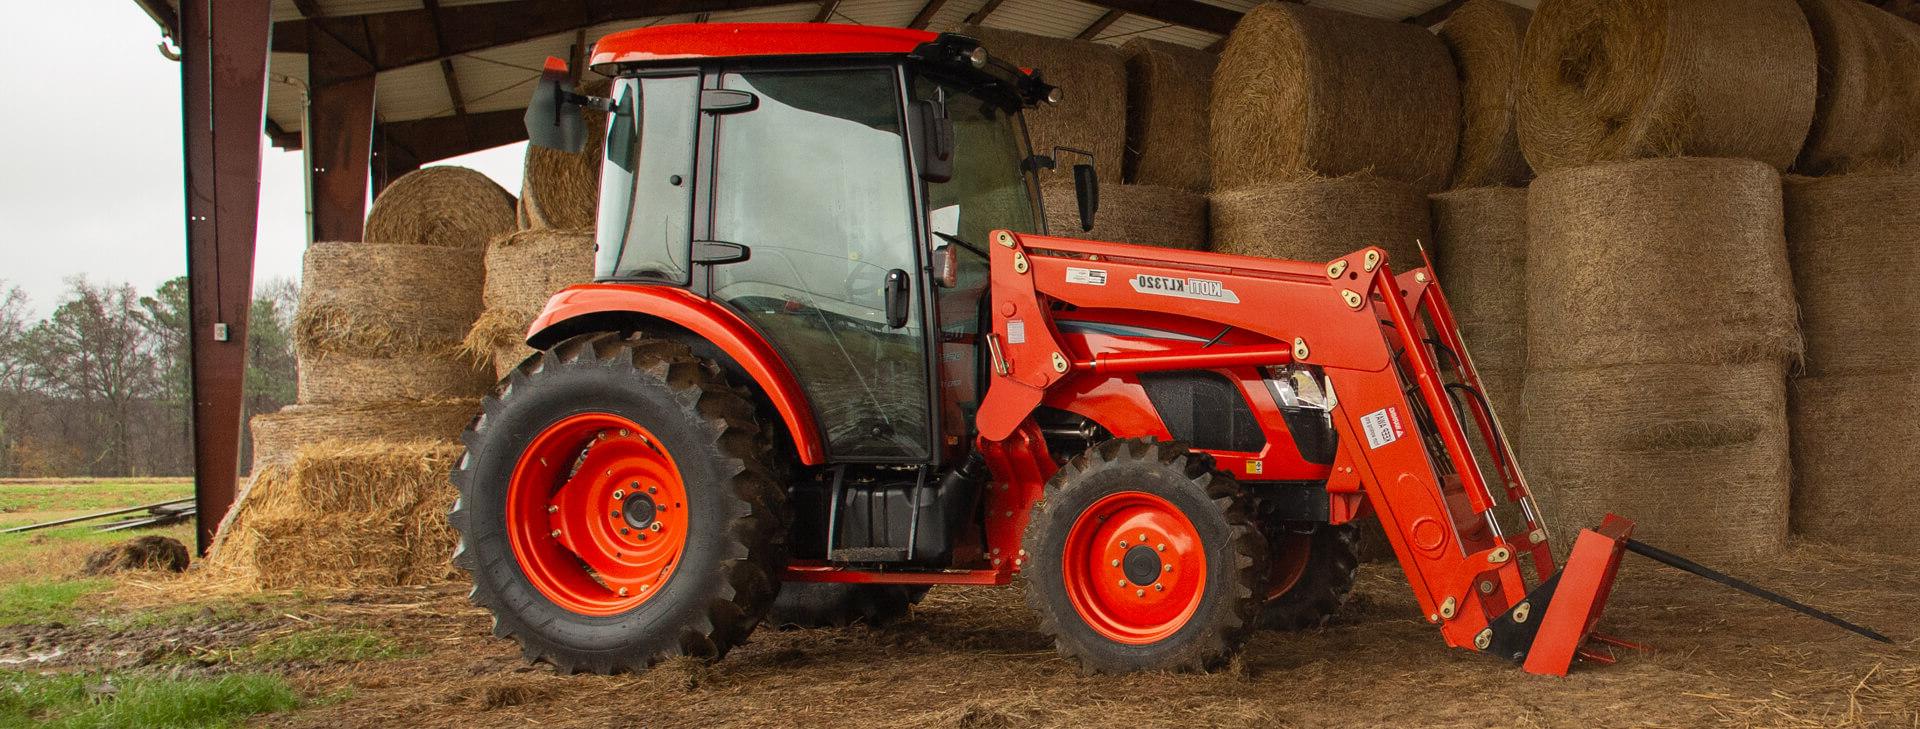 A compact tractor for commercial farming: find the best ones at Kioti